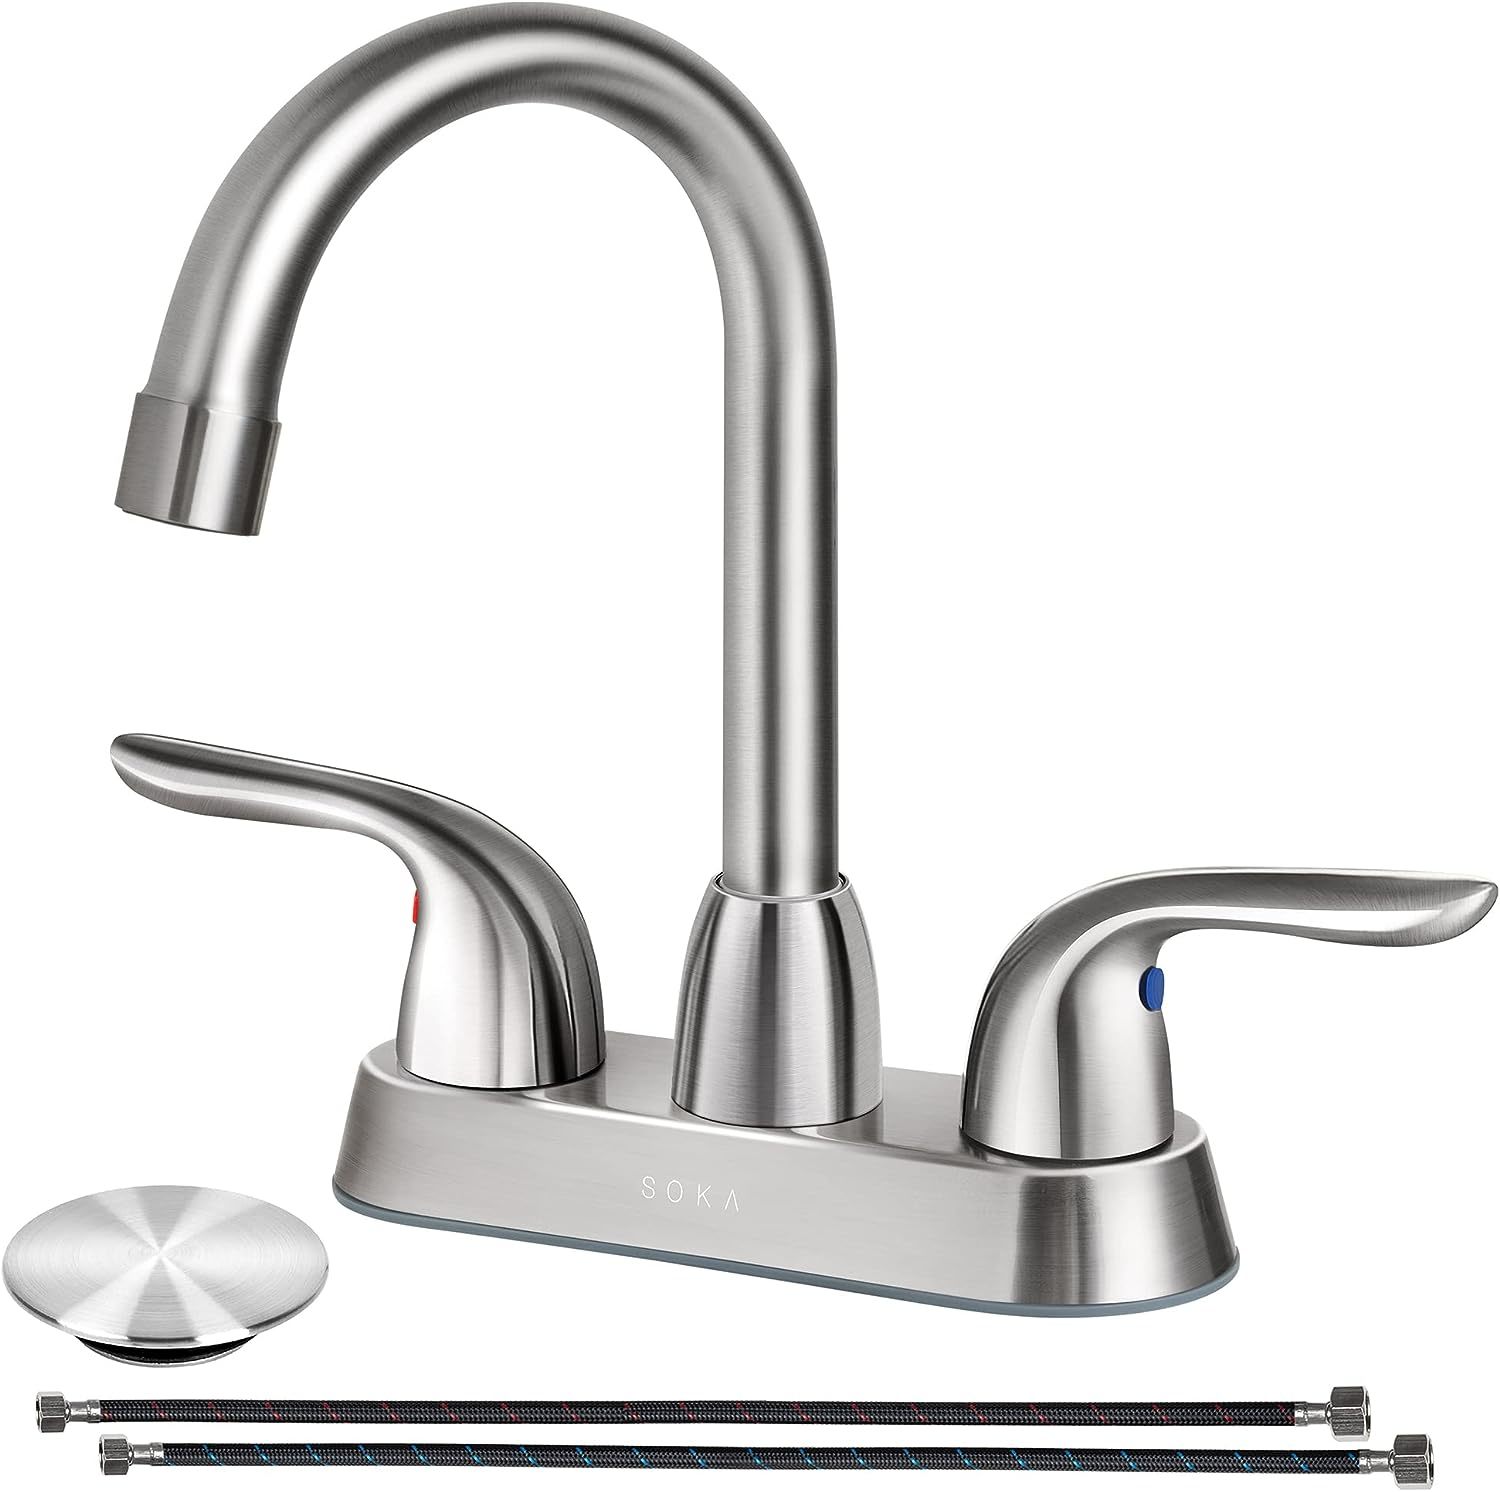 Primary image for Brushed Nickel Soka Centerset Bathroom Sink Faucet With Two Handles, High Arc,